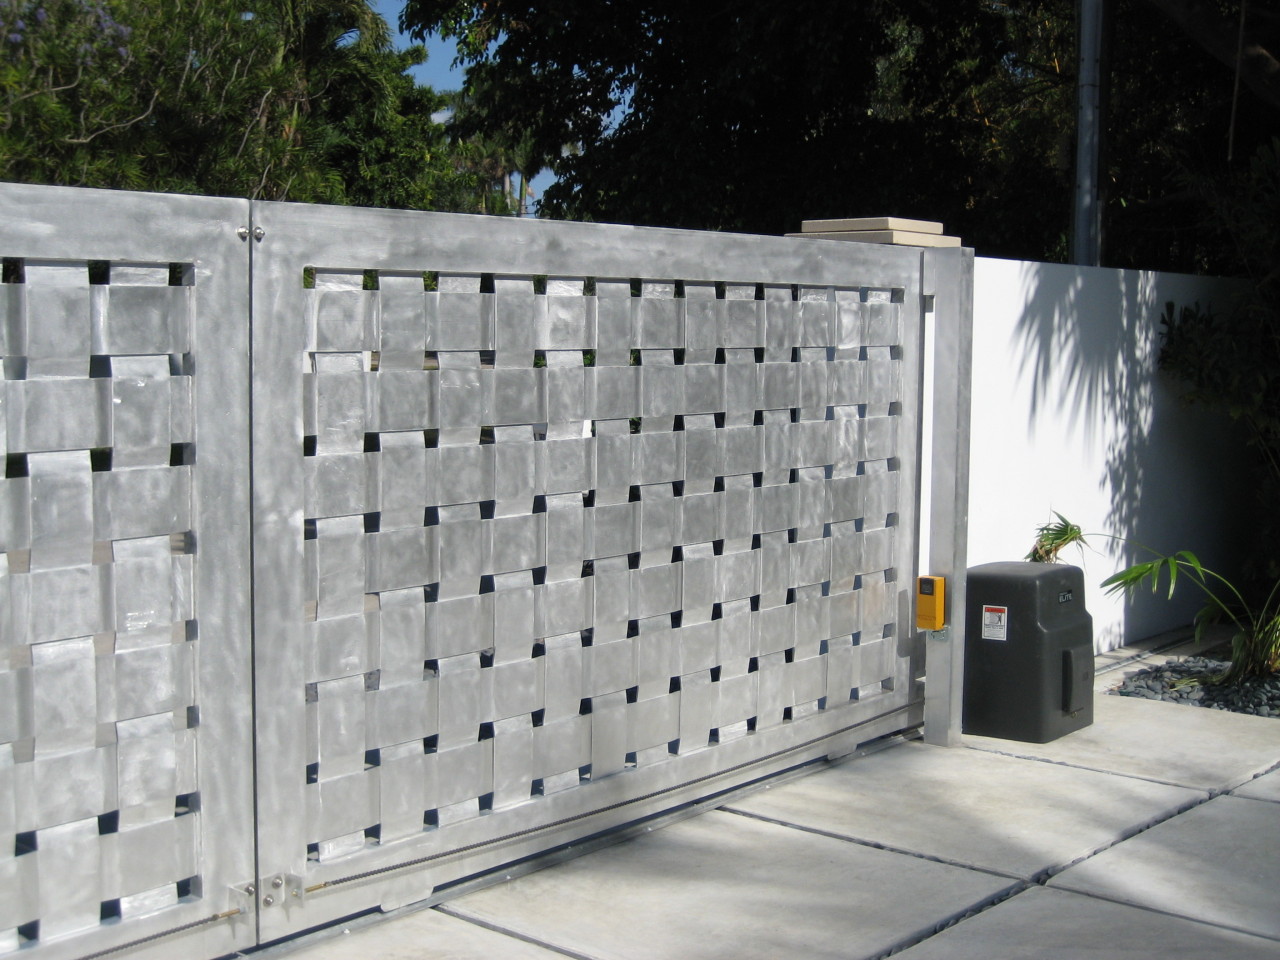 If your driveway gate is malfunctioning or if you’d like a new   one - call us!